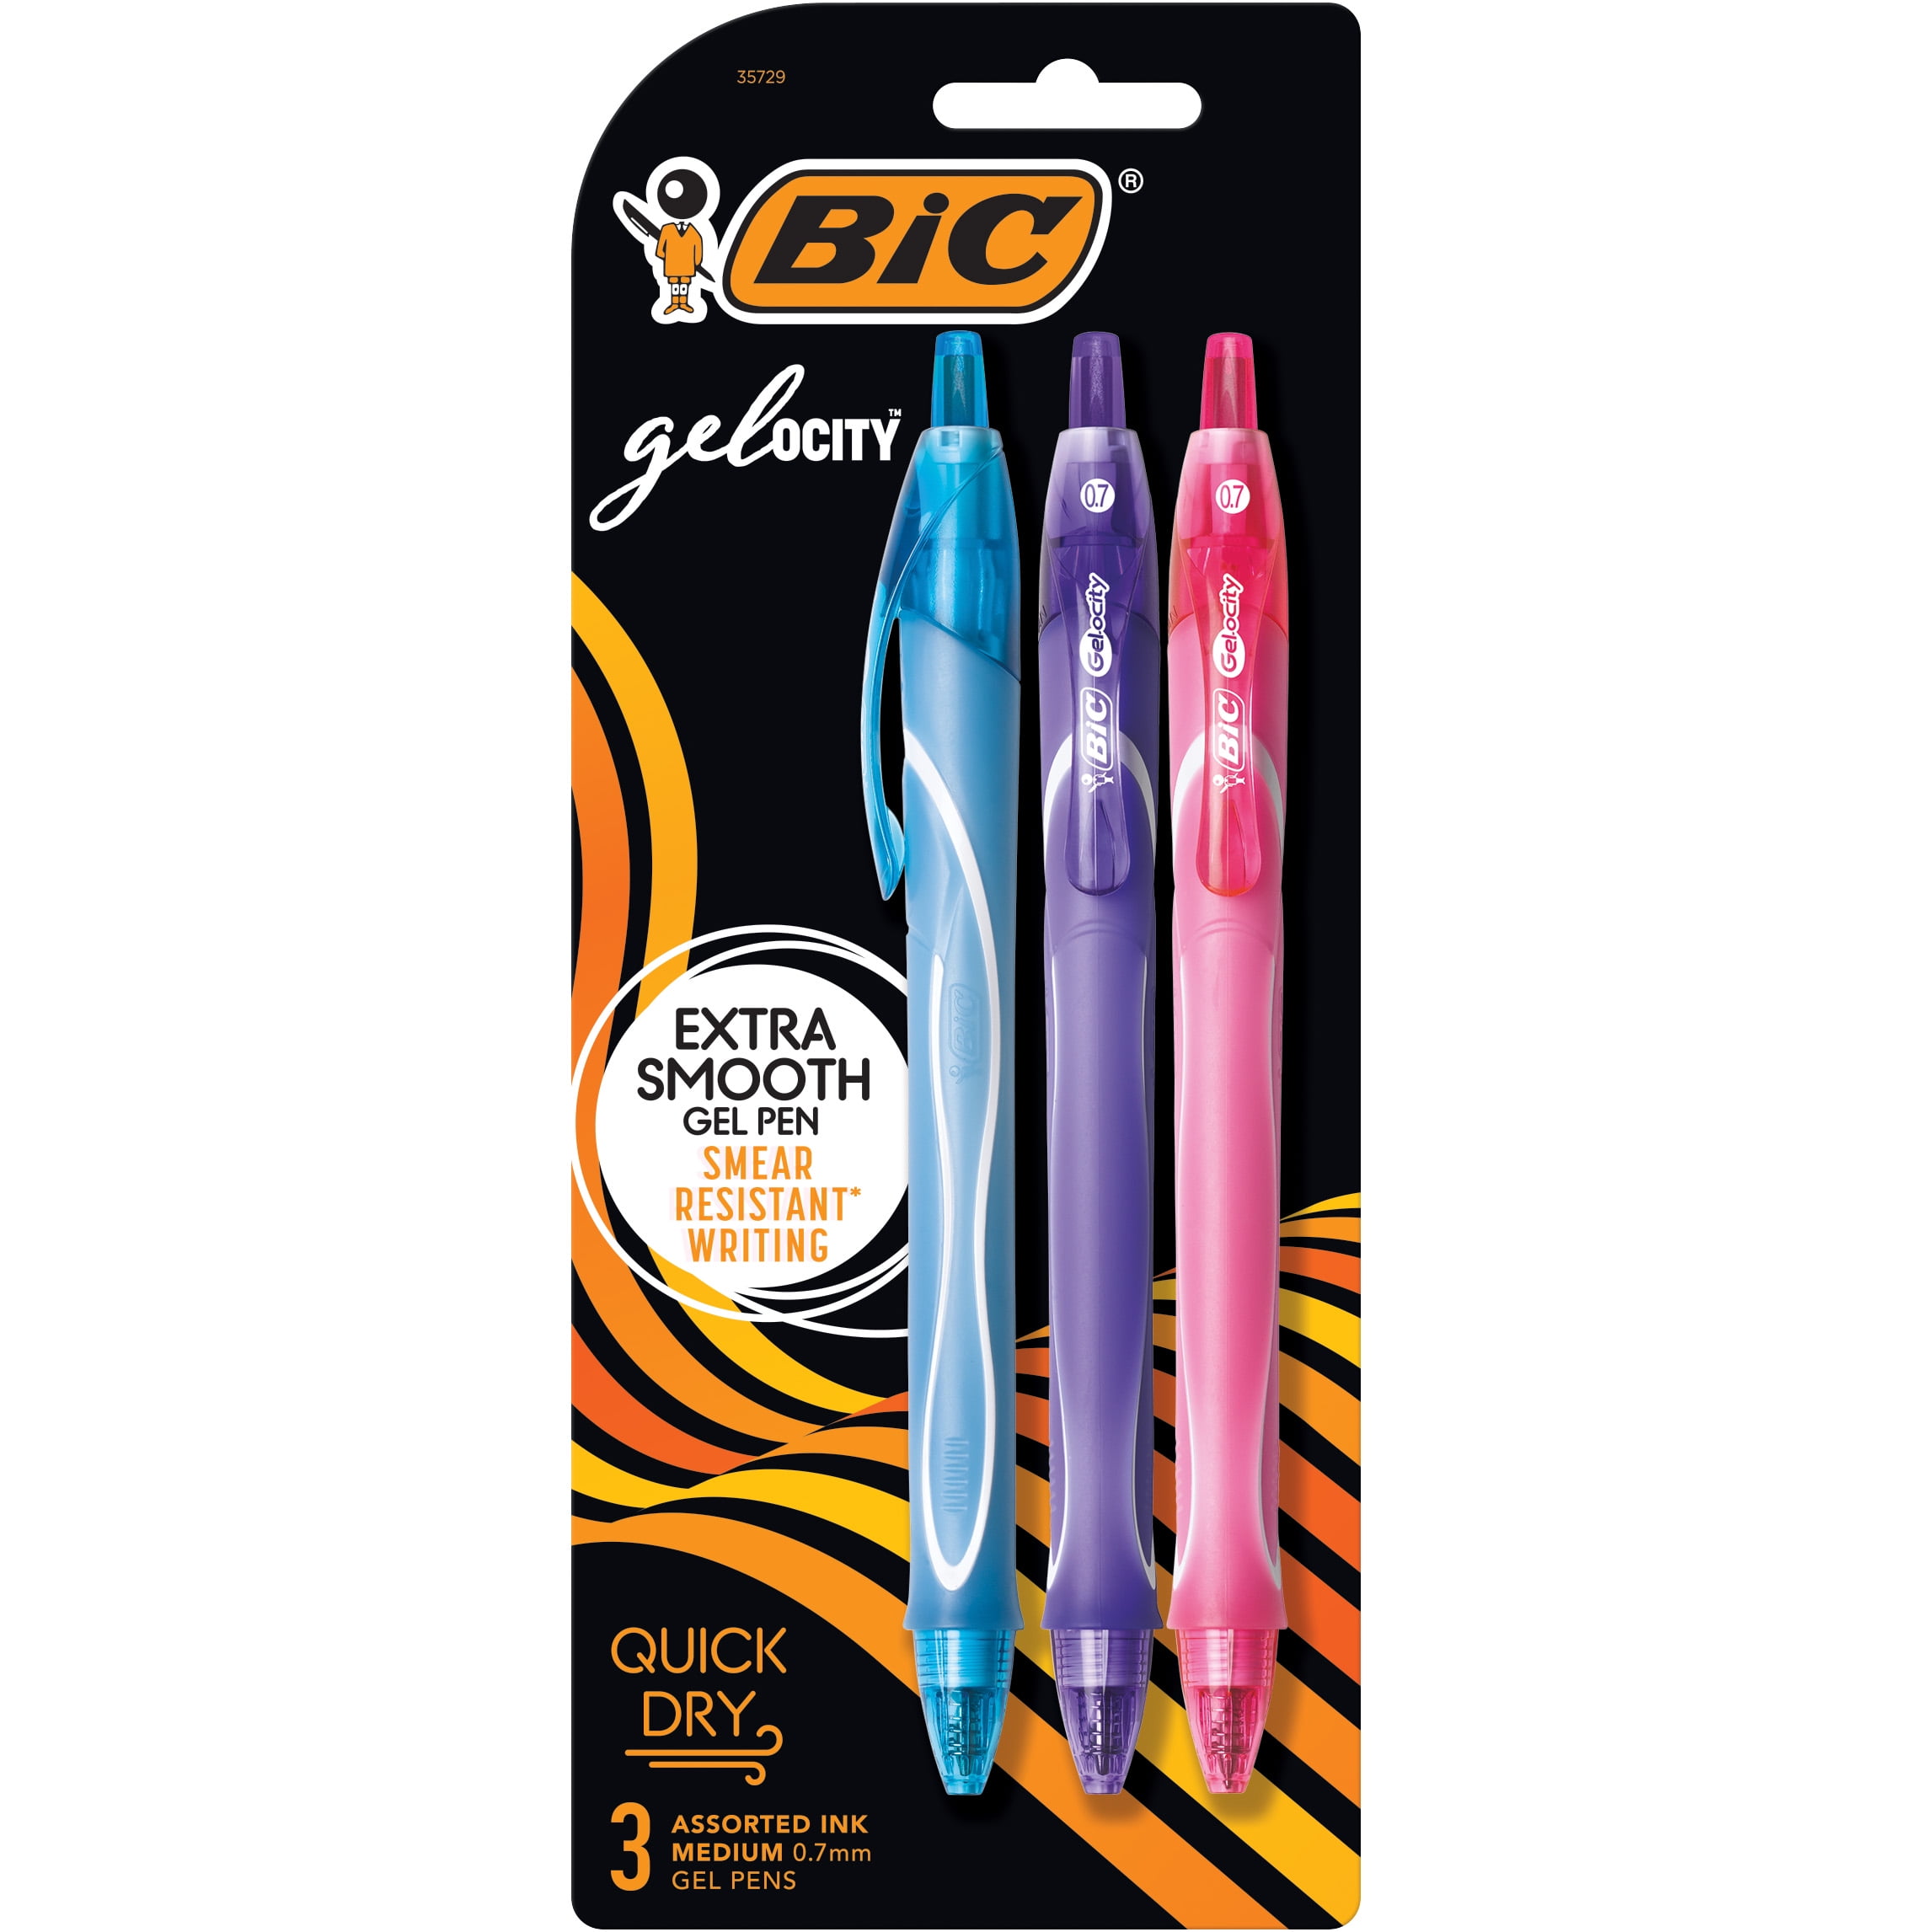 Assorted Colors Medium Point Gel-ocity Quick Dry Fashion Retractable Gel Pen 0.7mm 8-Count 